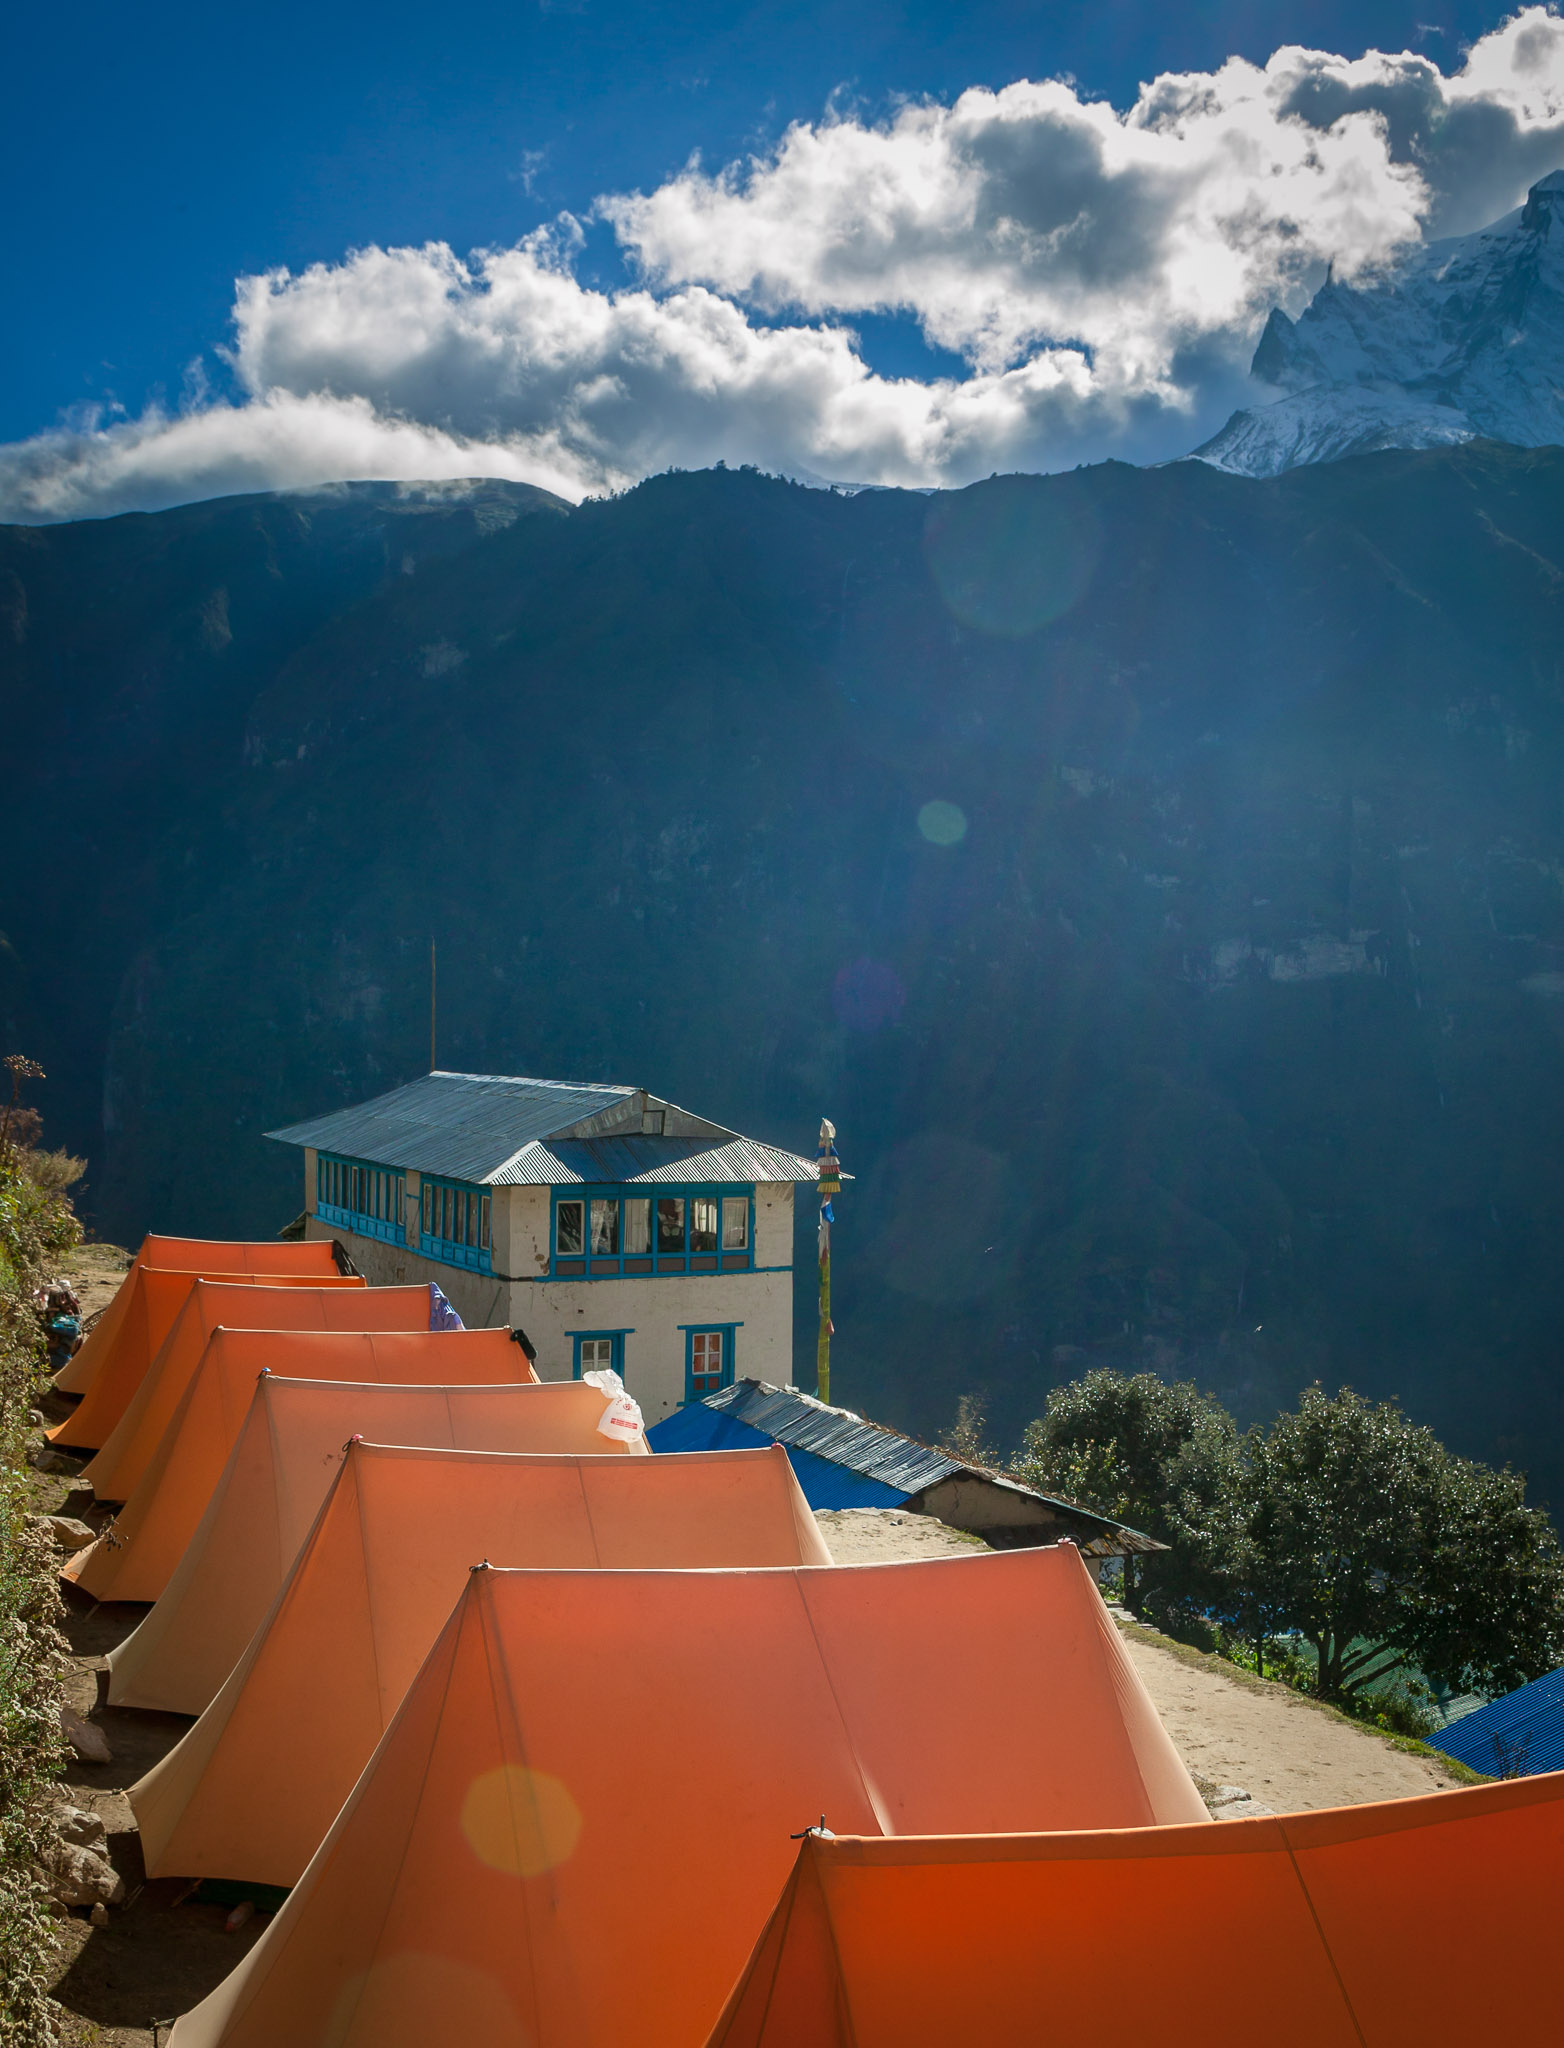 Another trekking group's camp